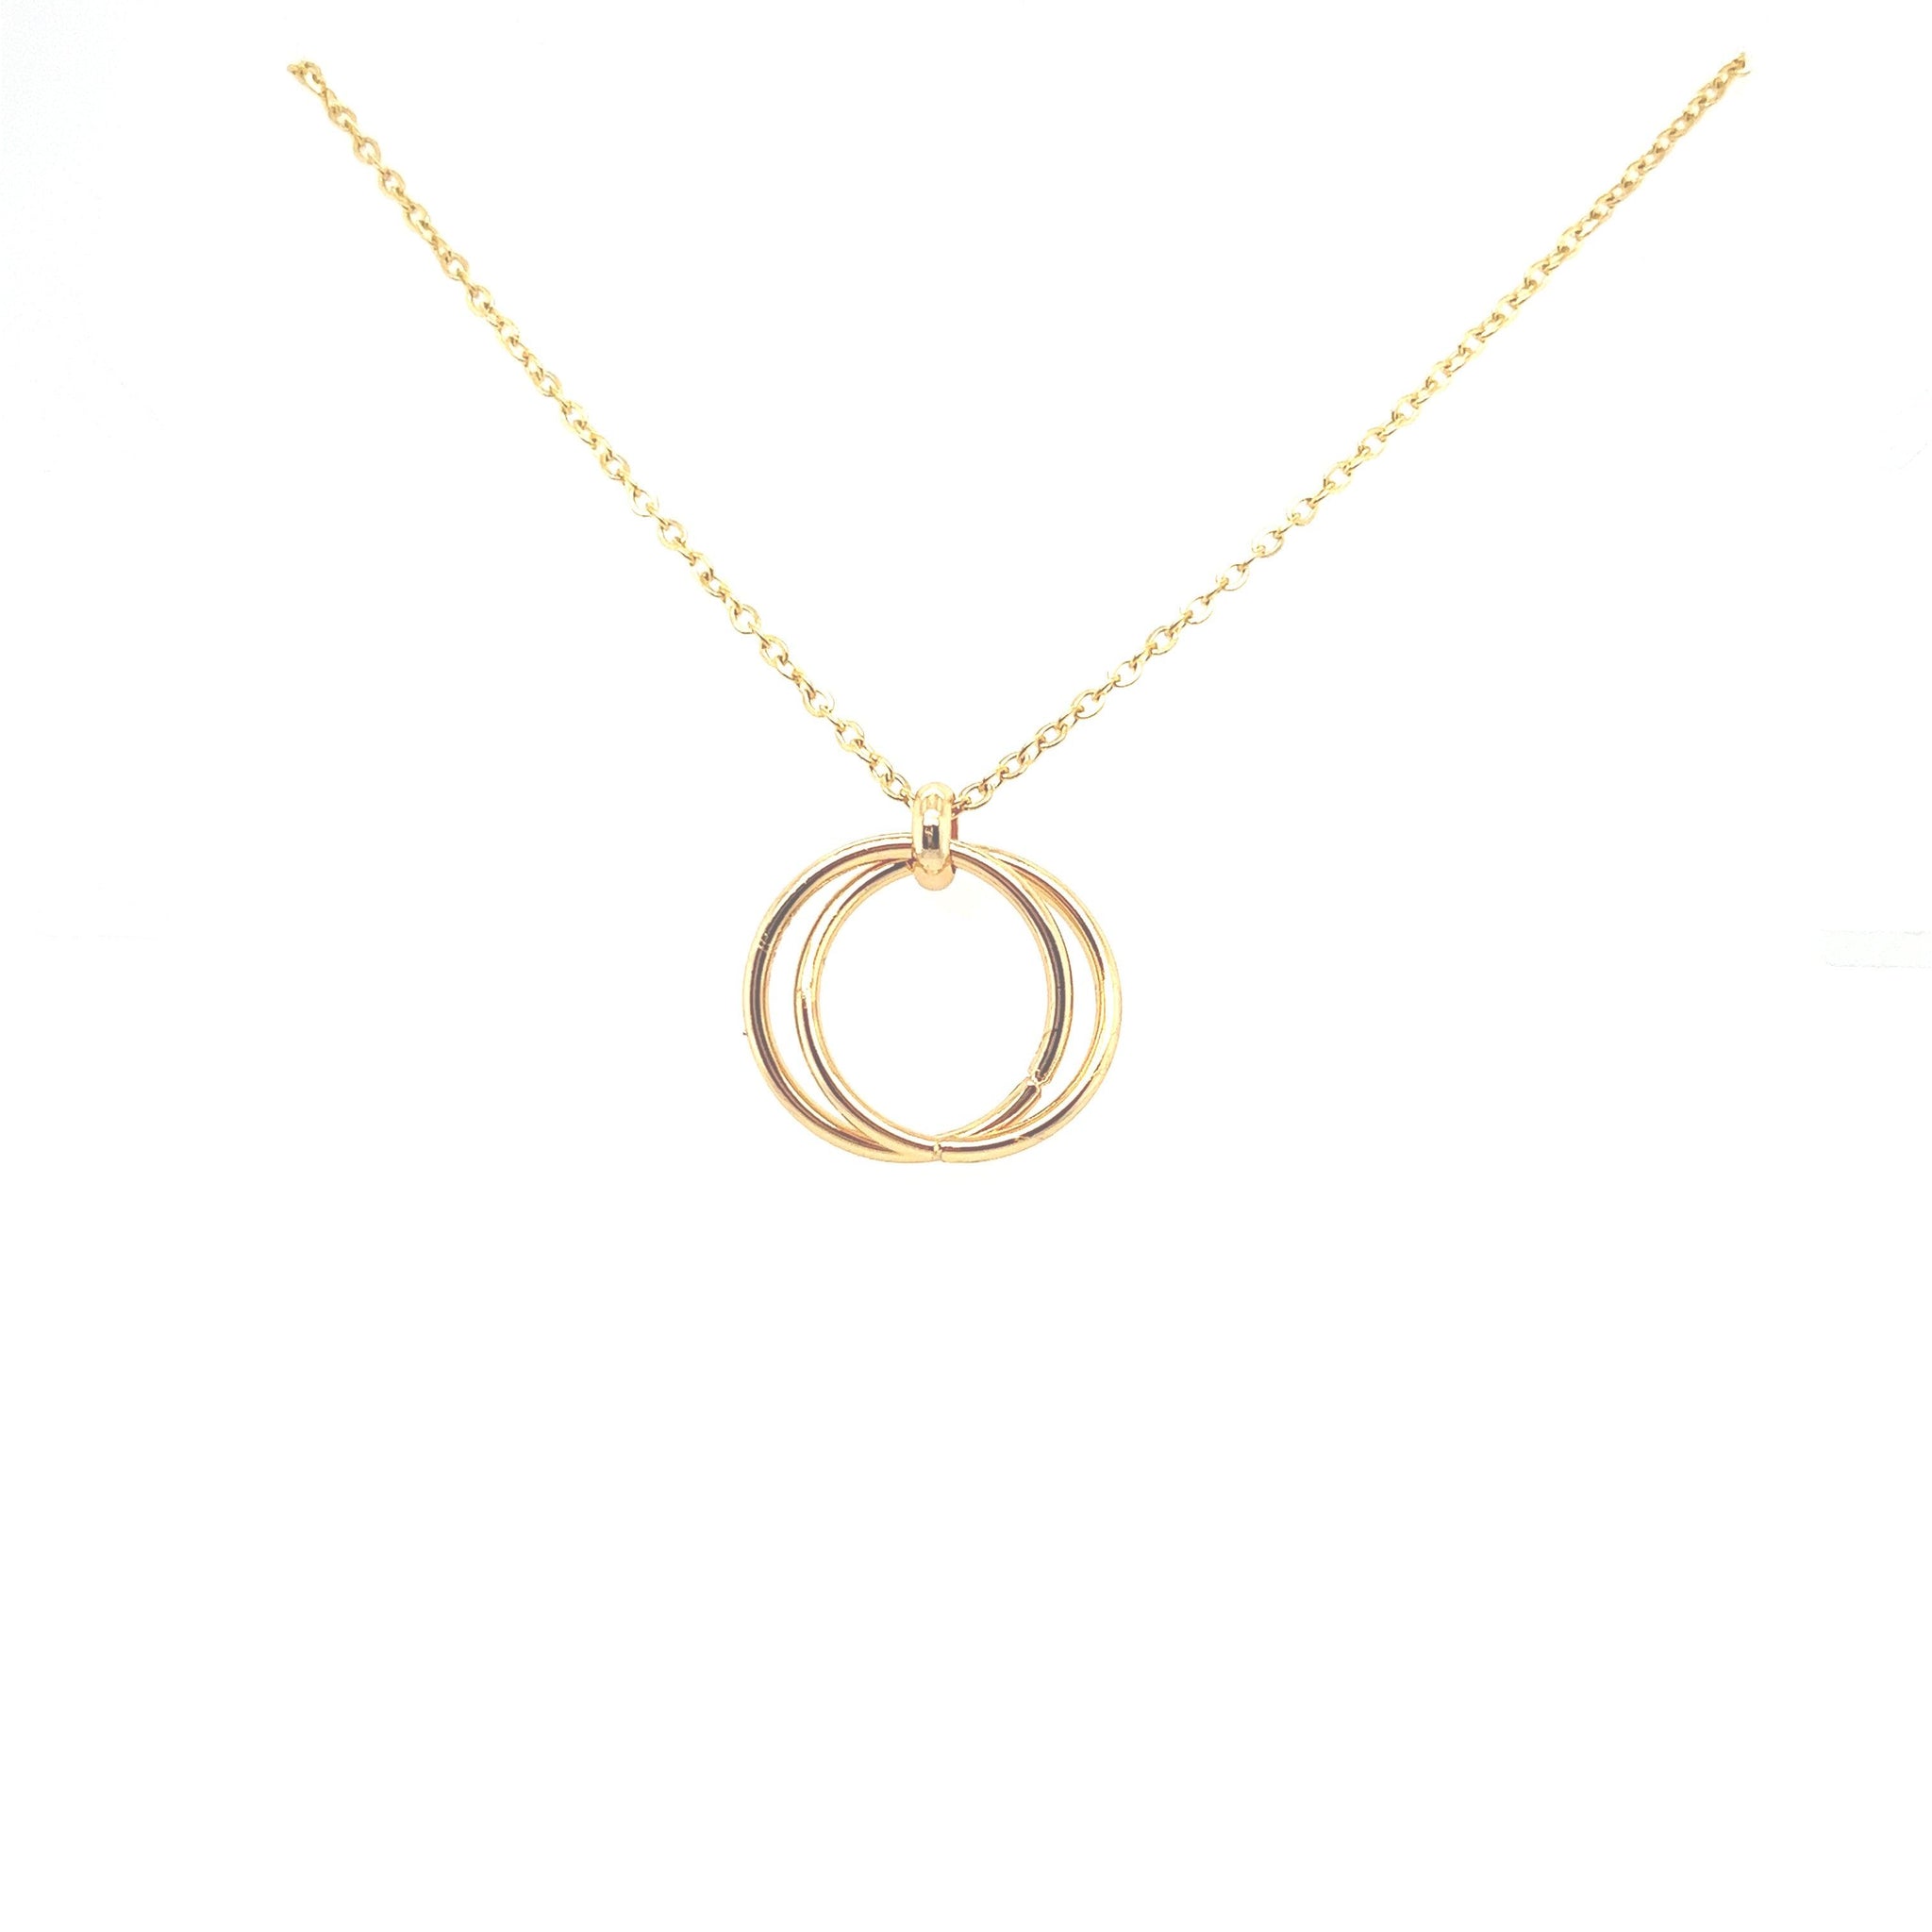 Holly Double Circle Charm Necklace - CM Jewellery Designs Ltd